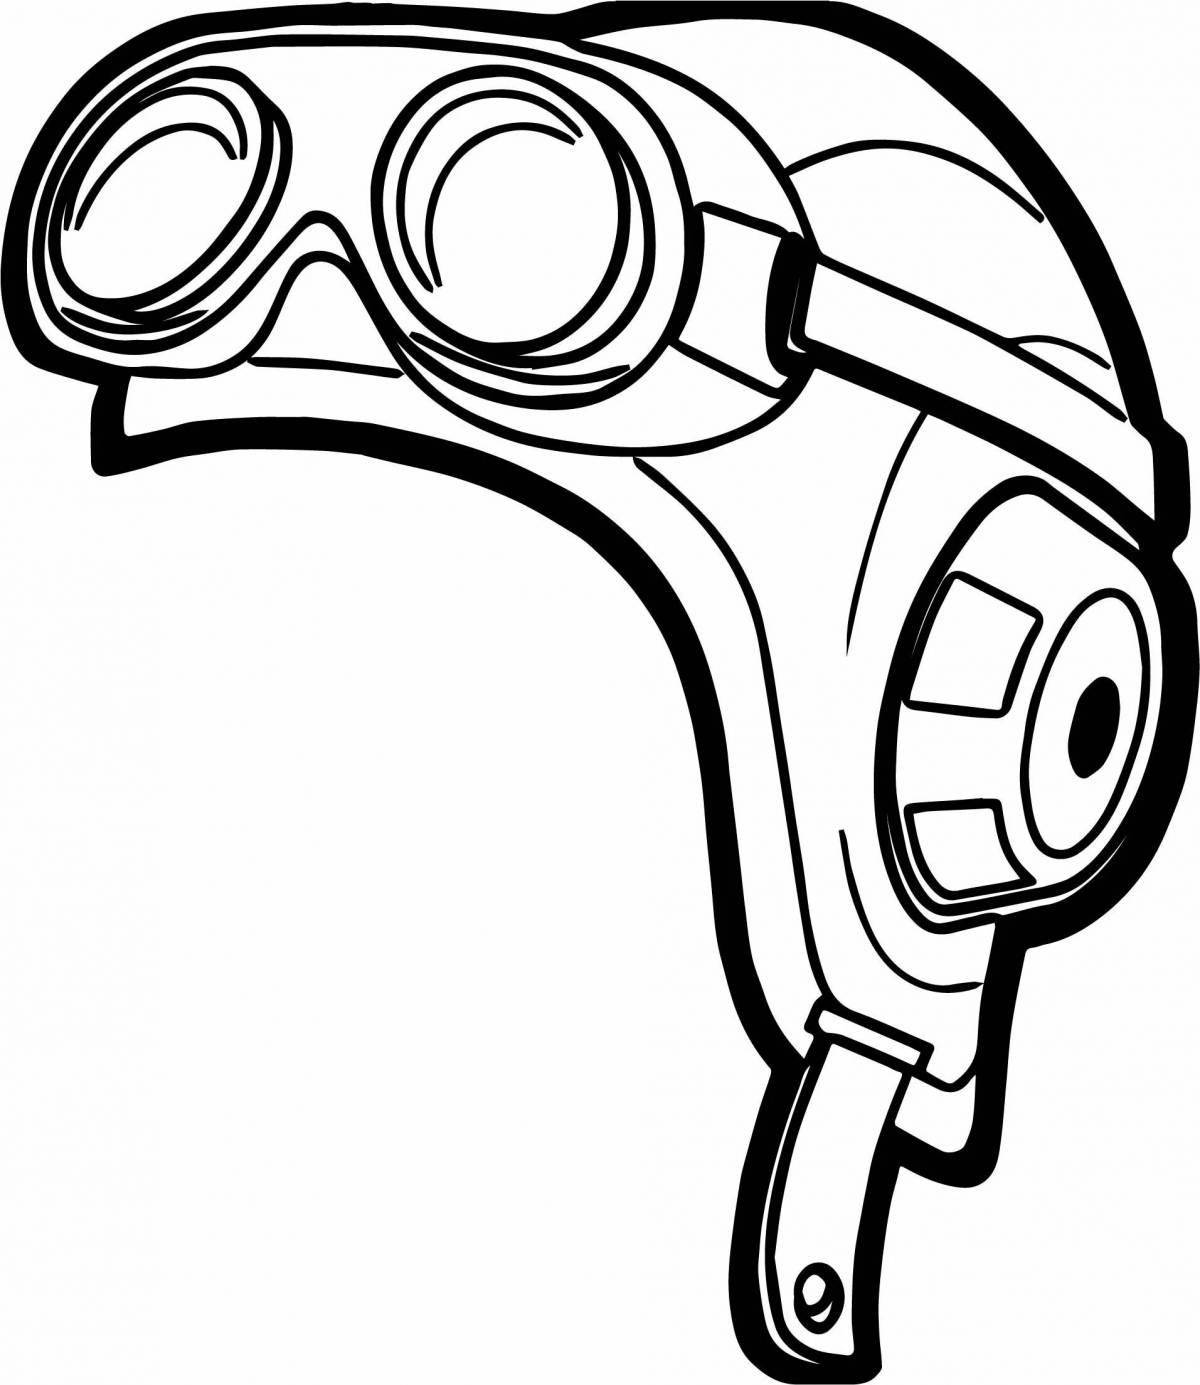 Stylish helmet coloring page